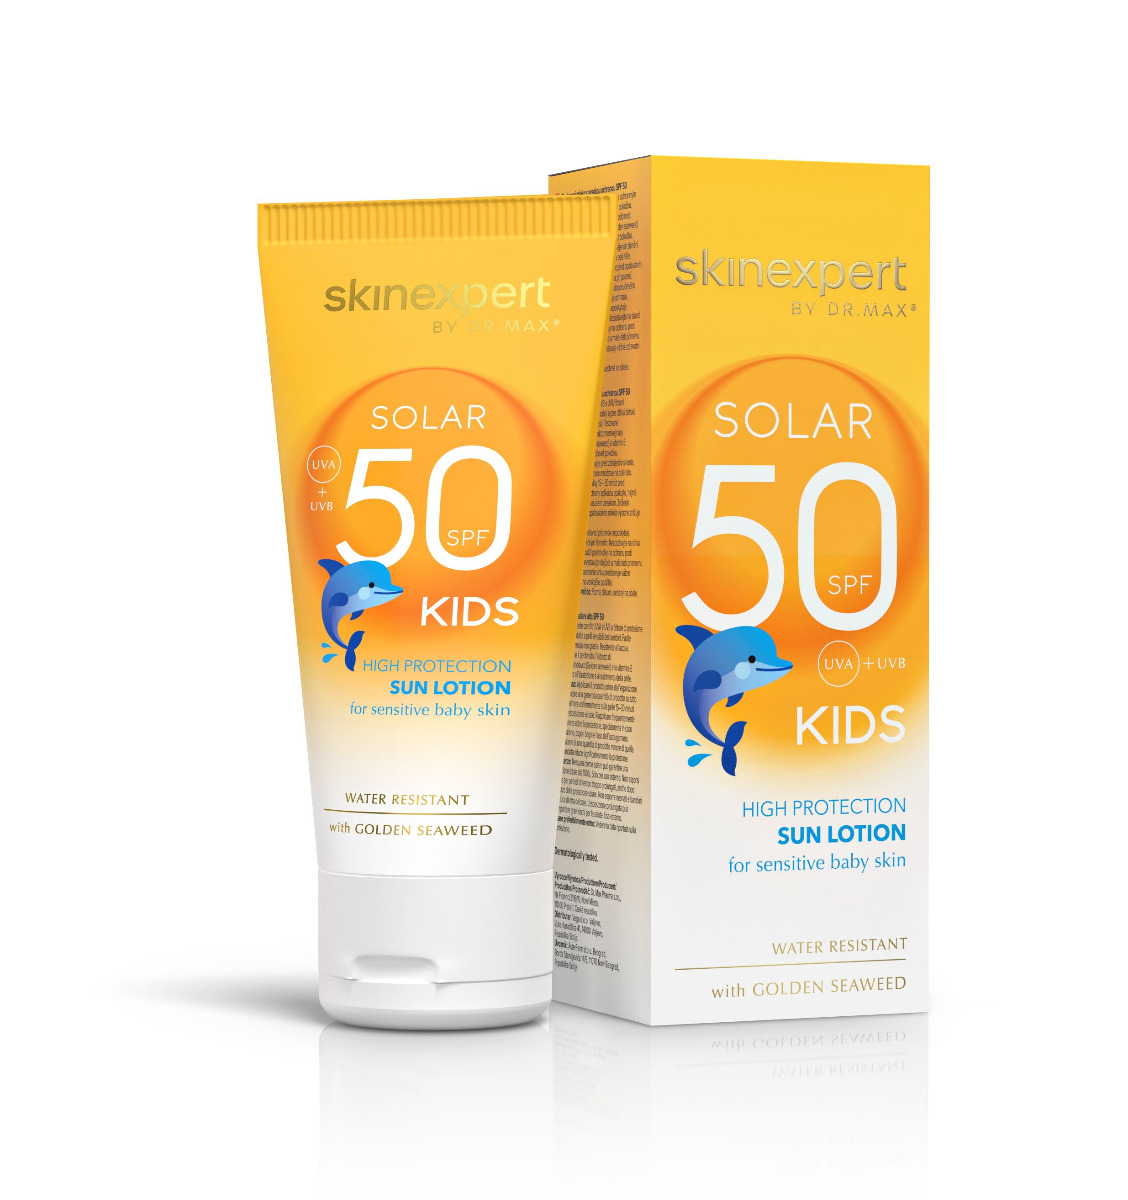 skinexpert BY DR.MAX SOLAR Sun Lotion Kids SPF50 200 ml skinexpert BY DR.MAX SOLAR